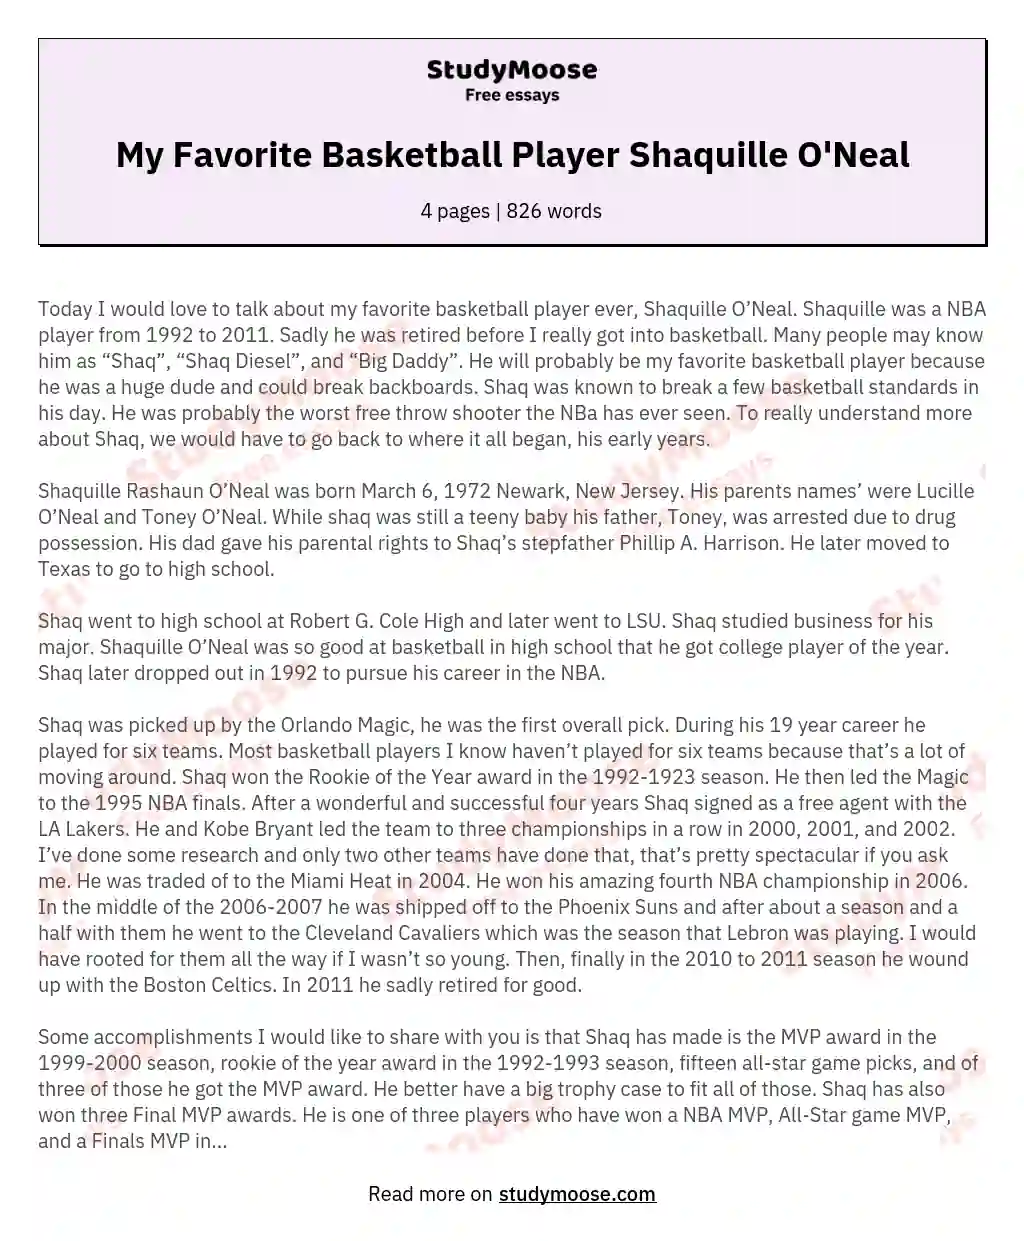 My Favorite Basketball Player Shaquille O'Neal essay